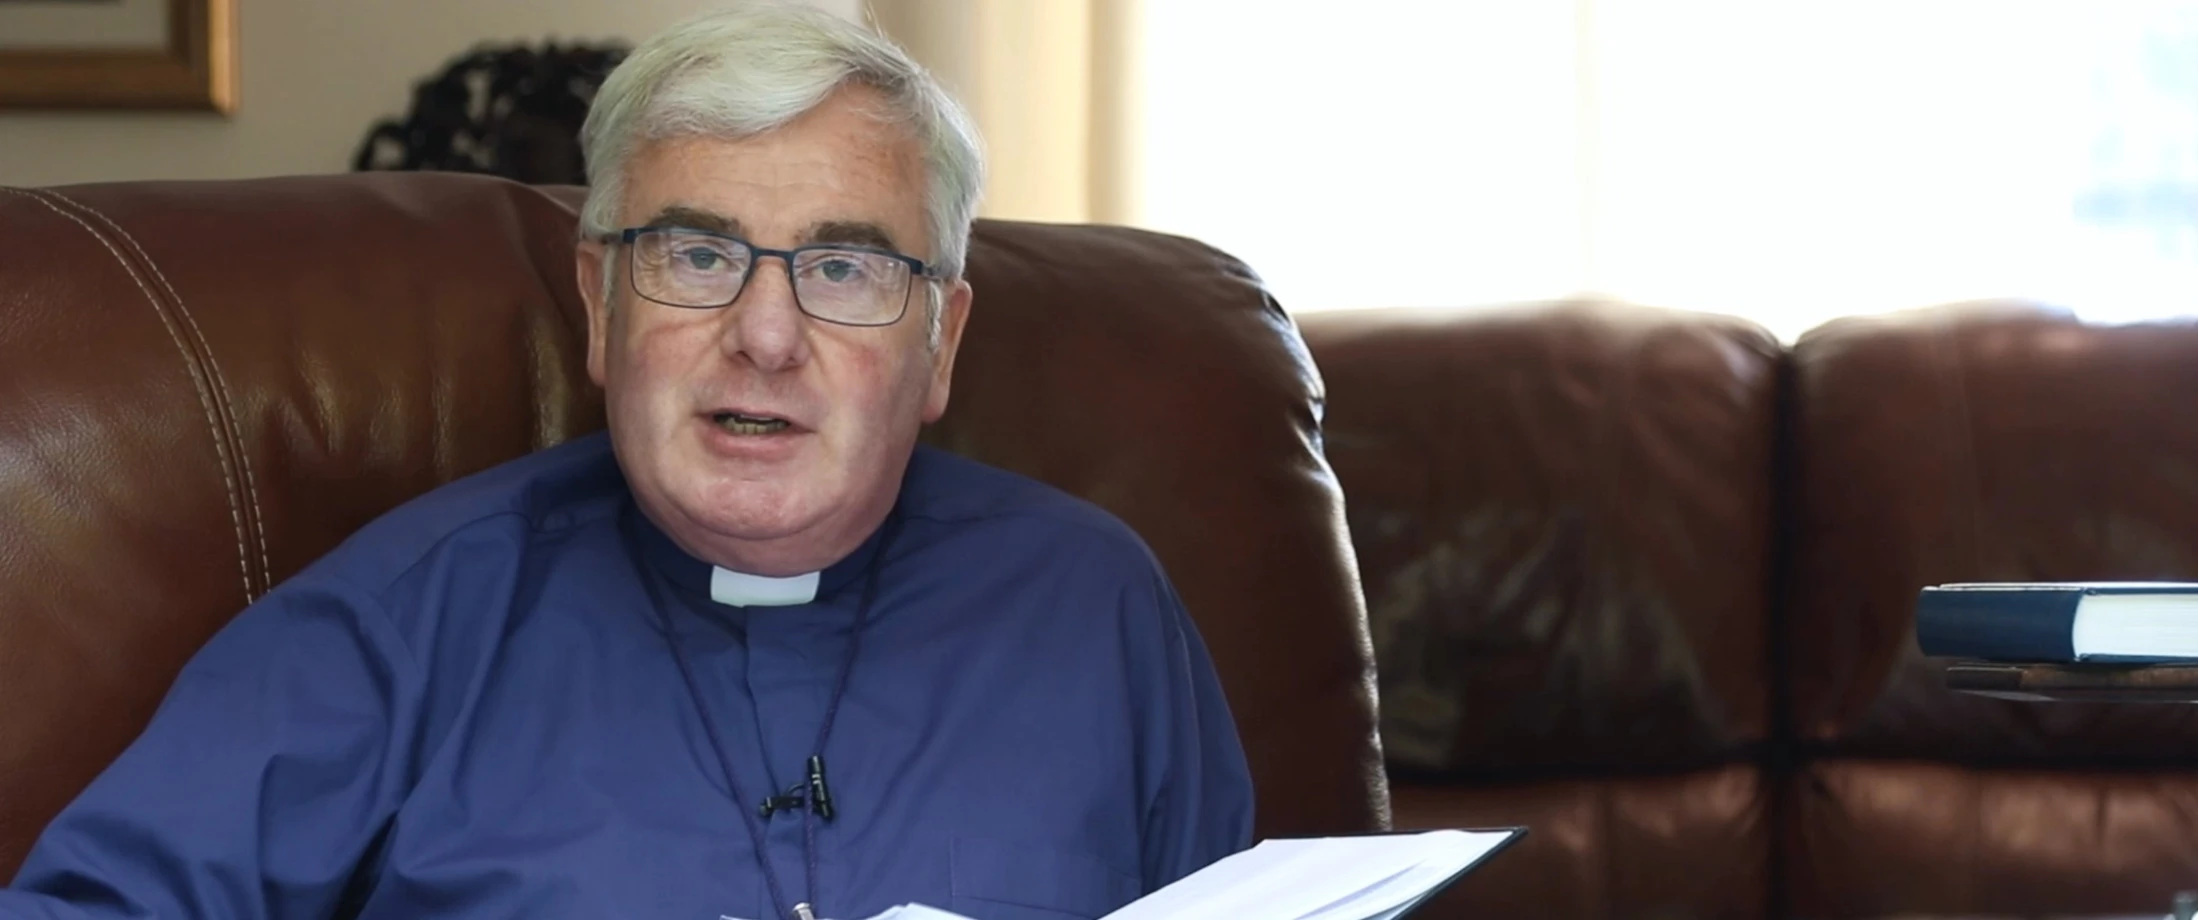 Bishop David shares a message for the young adults of the diocese